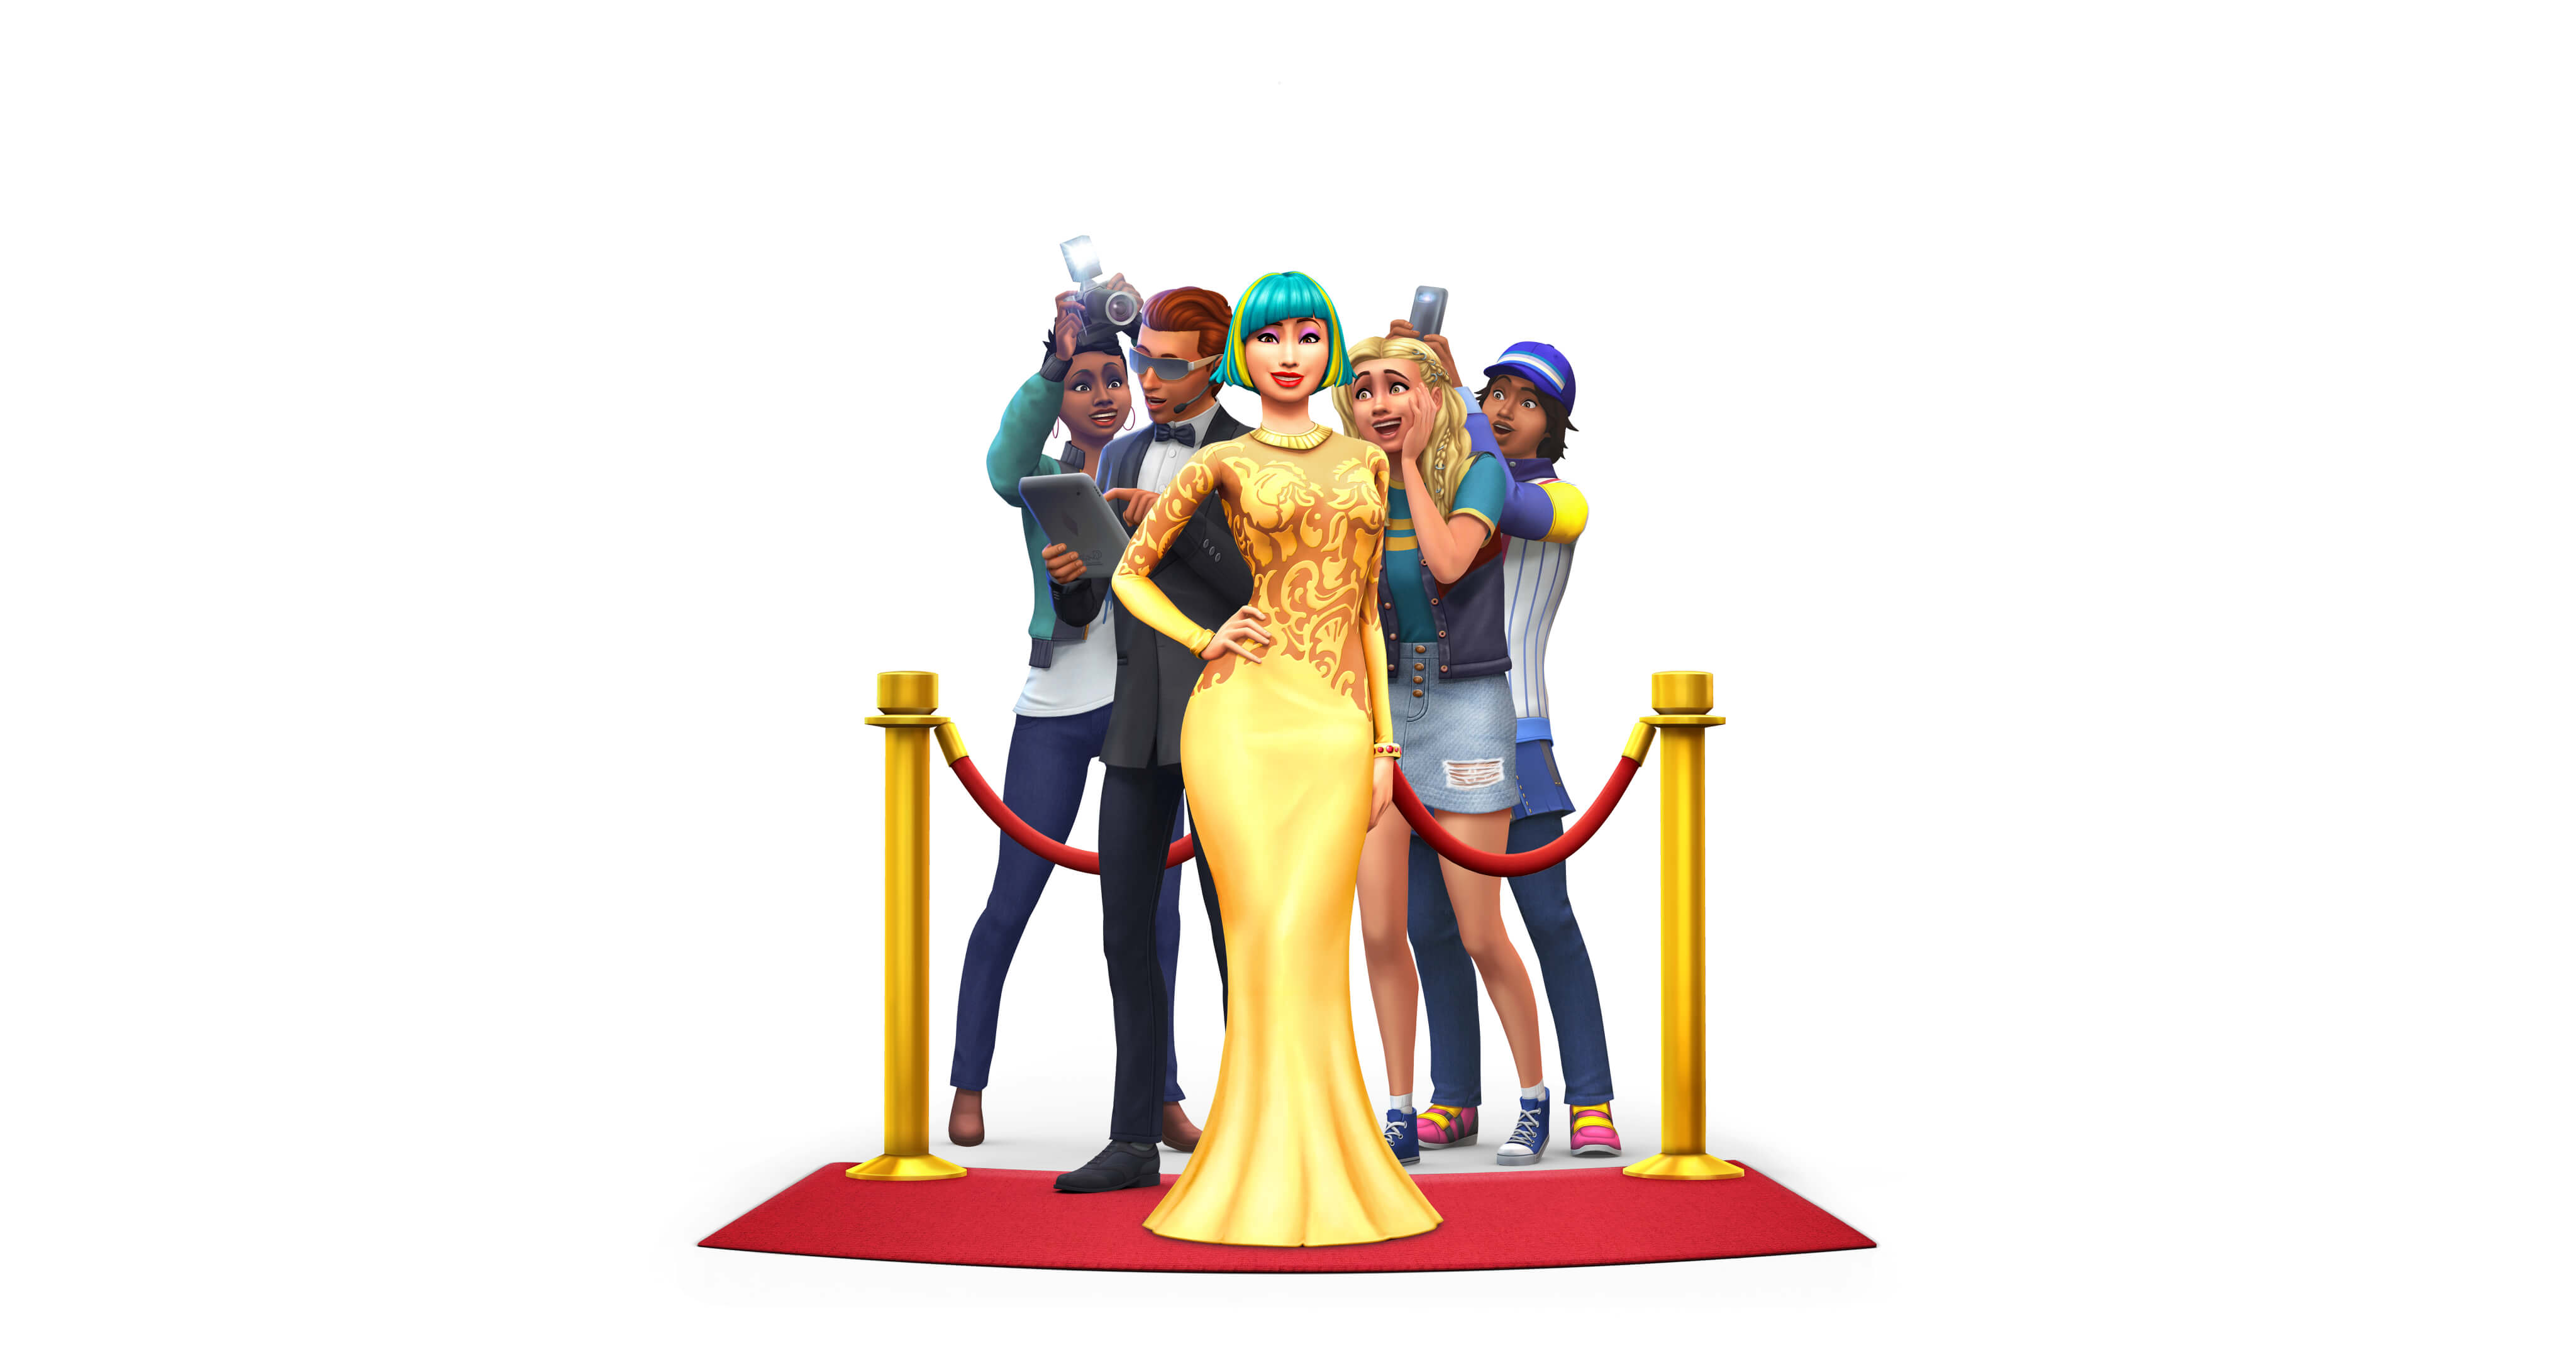 sims 4 expansion packs 2019